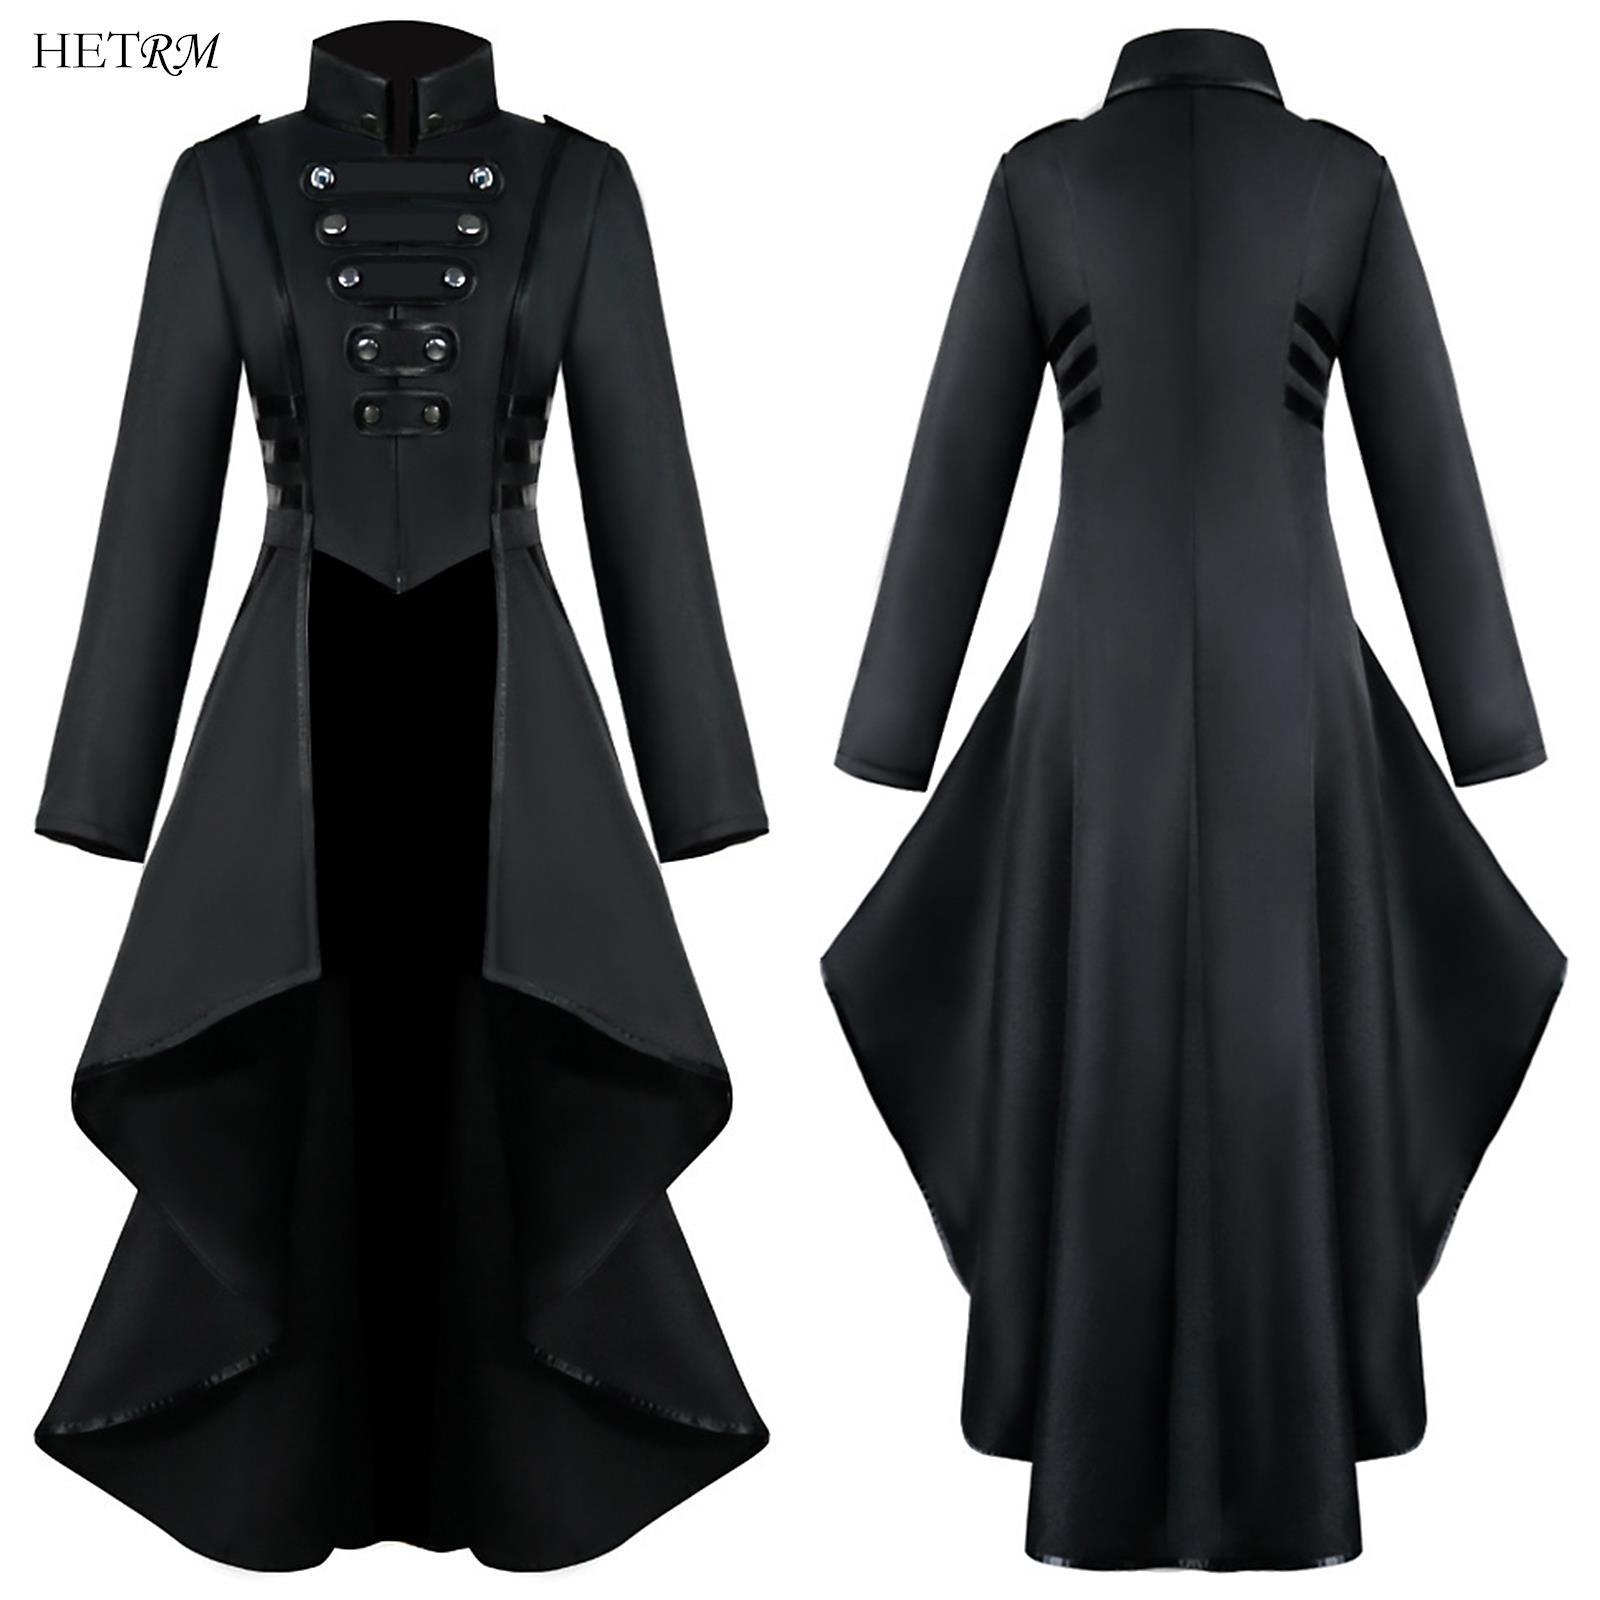 

Raincoats Women Jacket Coat Medieval Retro Lace Victorian Gothic Long Sleeve Button Tailcoat Steampunk Halloween Party Costume Clothing, Black